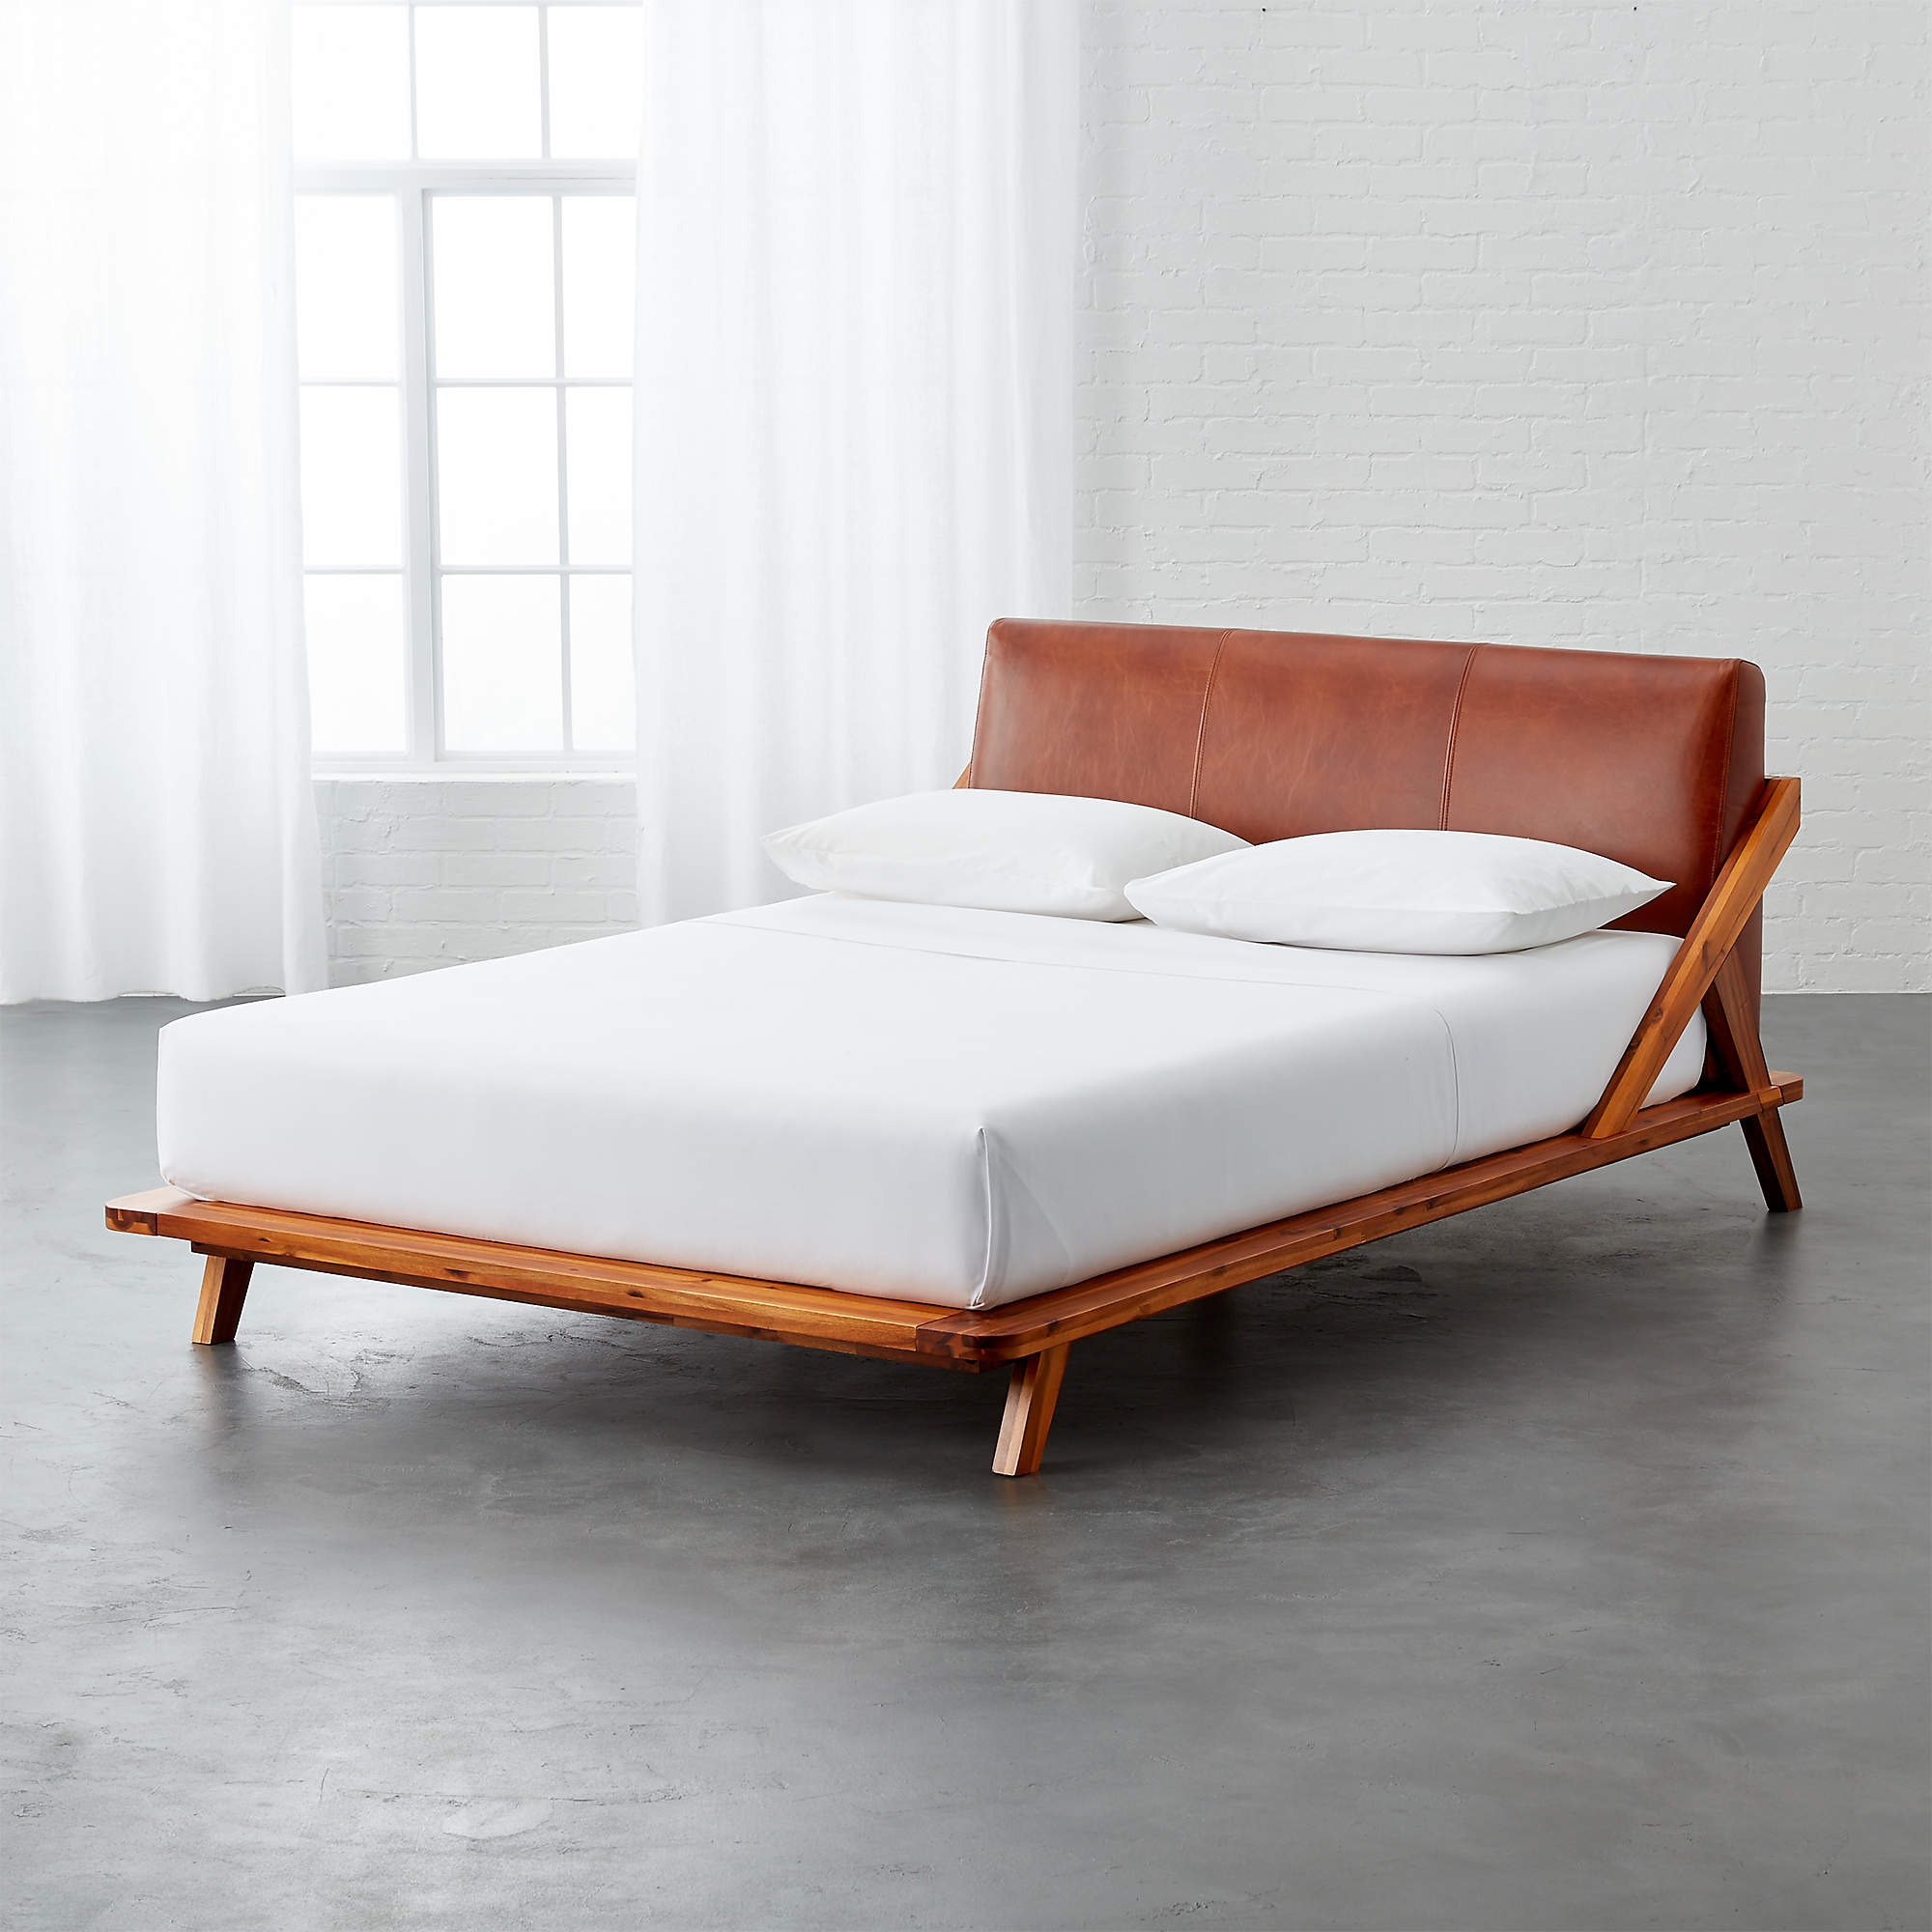 Drommen Acacia Bed with Leather Headboard | CB2